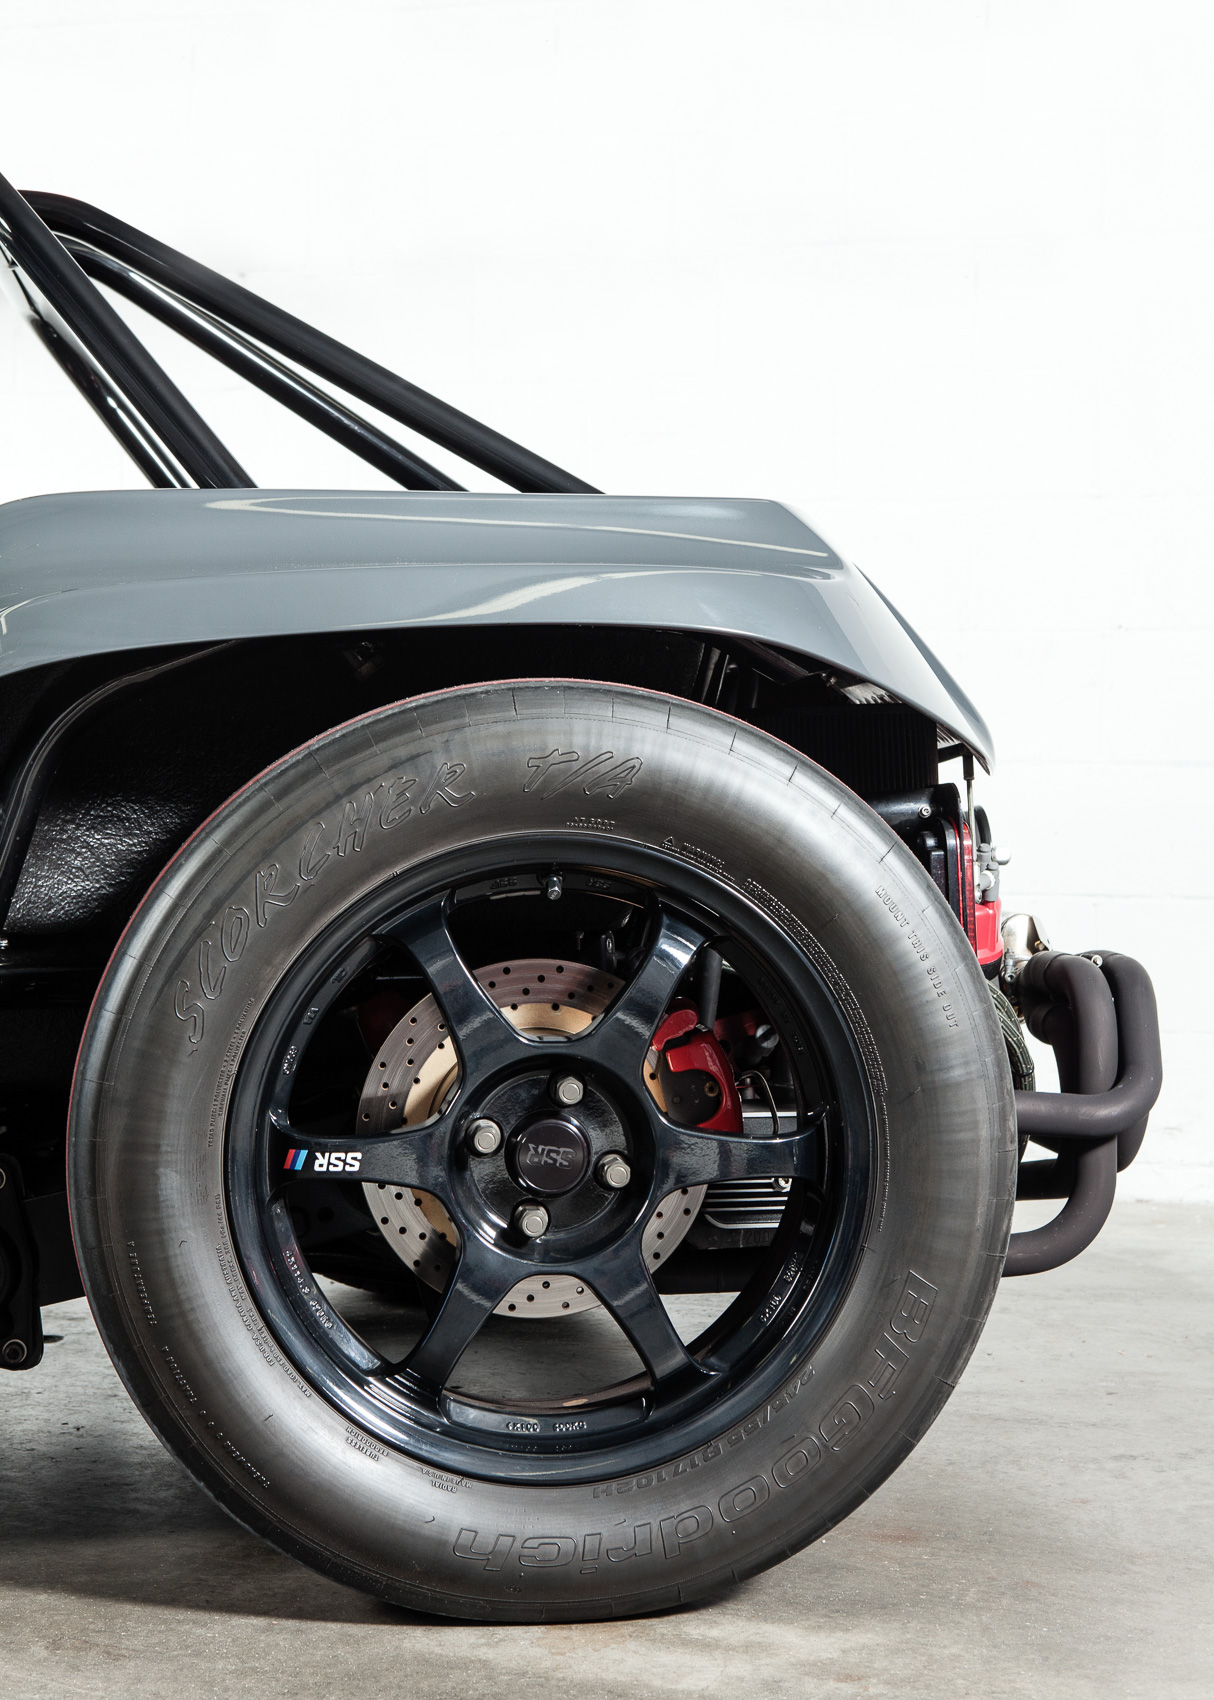 Meyers Manx dune buggy. Meet the makers | Los Angeles | Editorial and Commercial Photographer Patrick Strattner